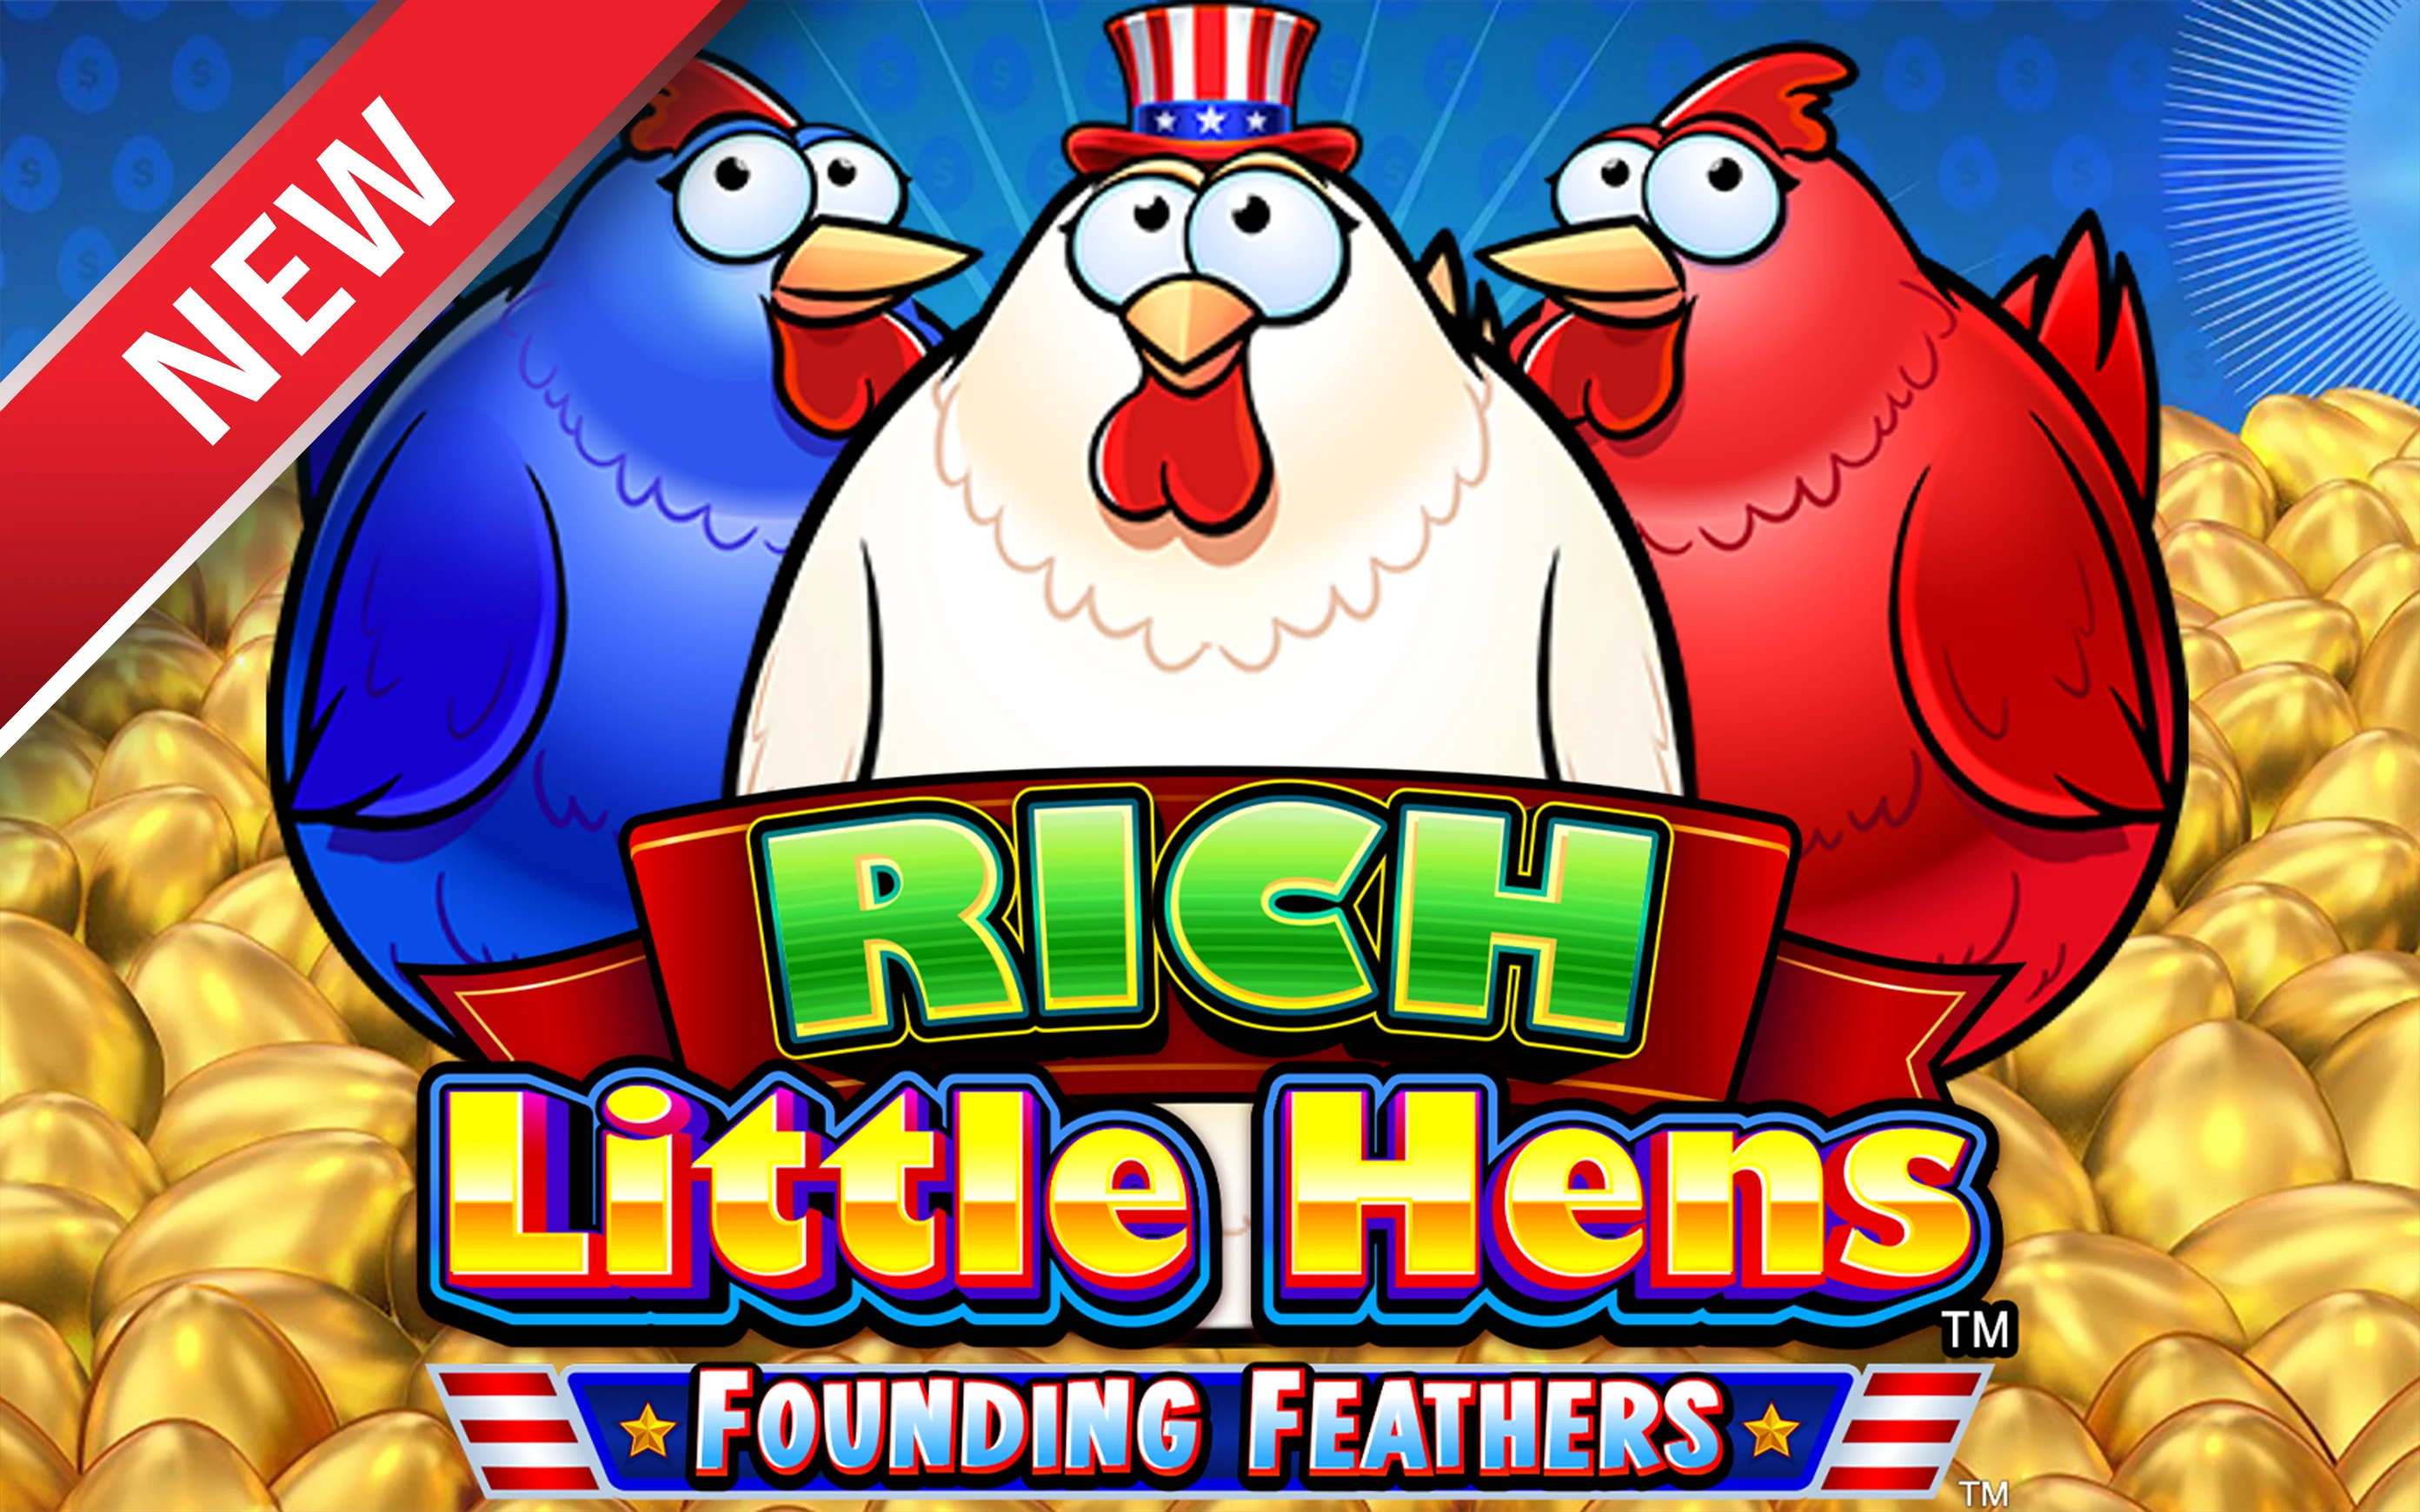 Play Rich Little Hens Founding Feathers on Starcasino.be online casino